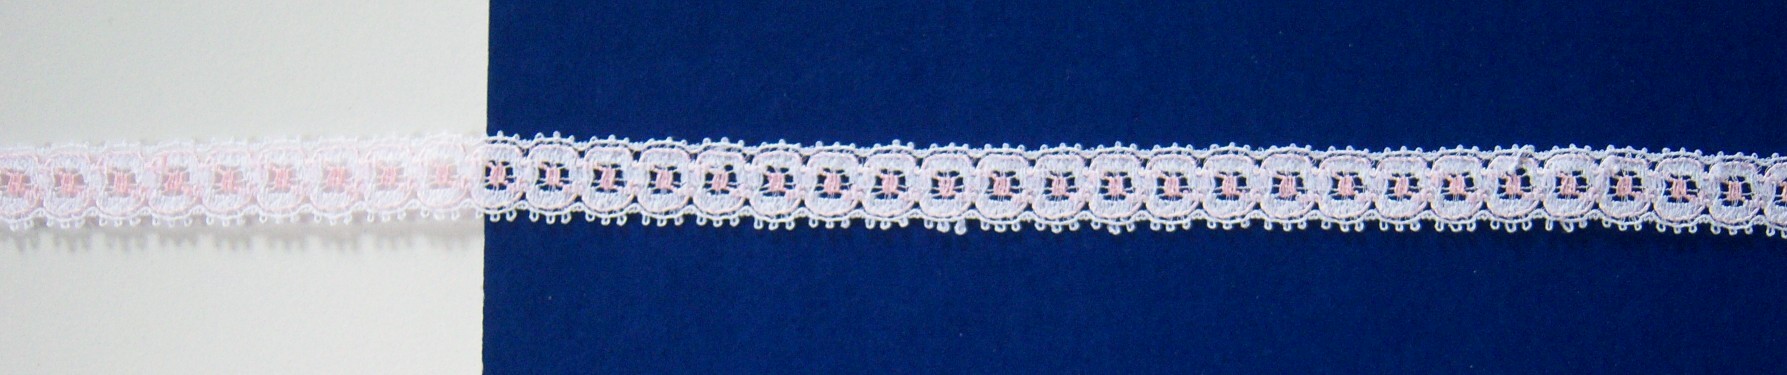 White/Pink 1/2" Lace